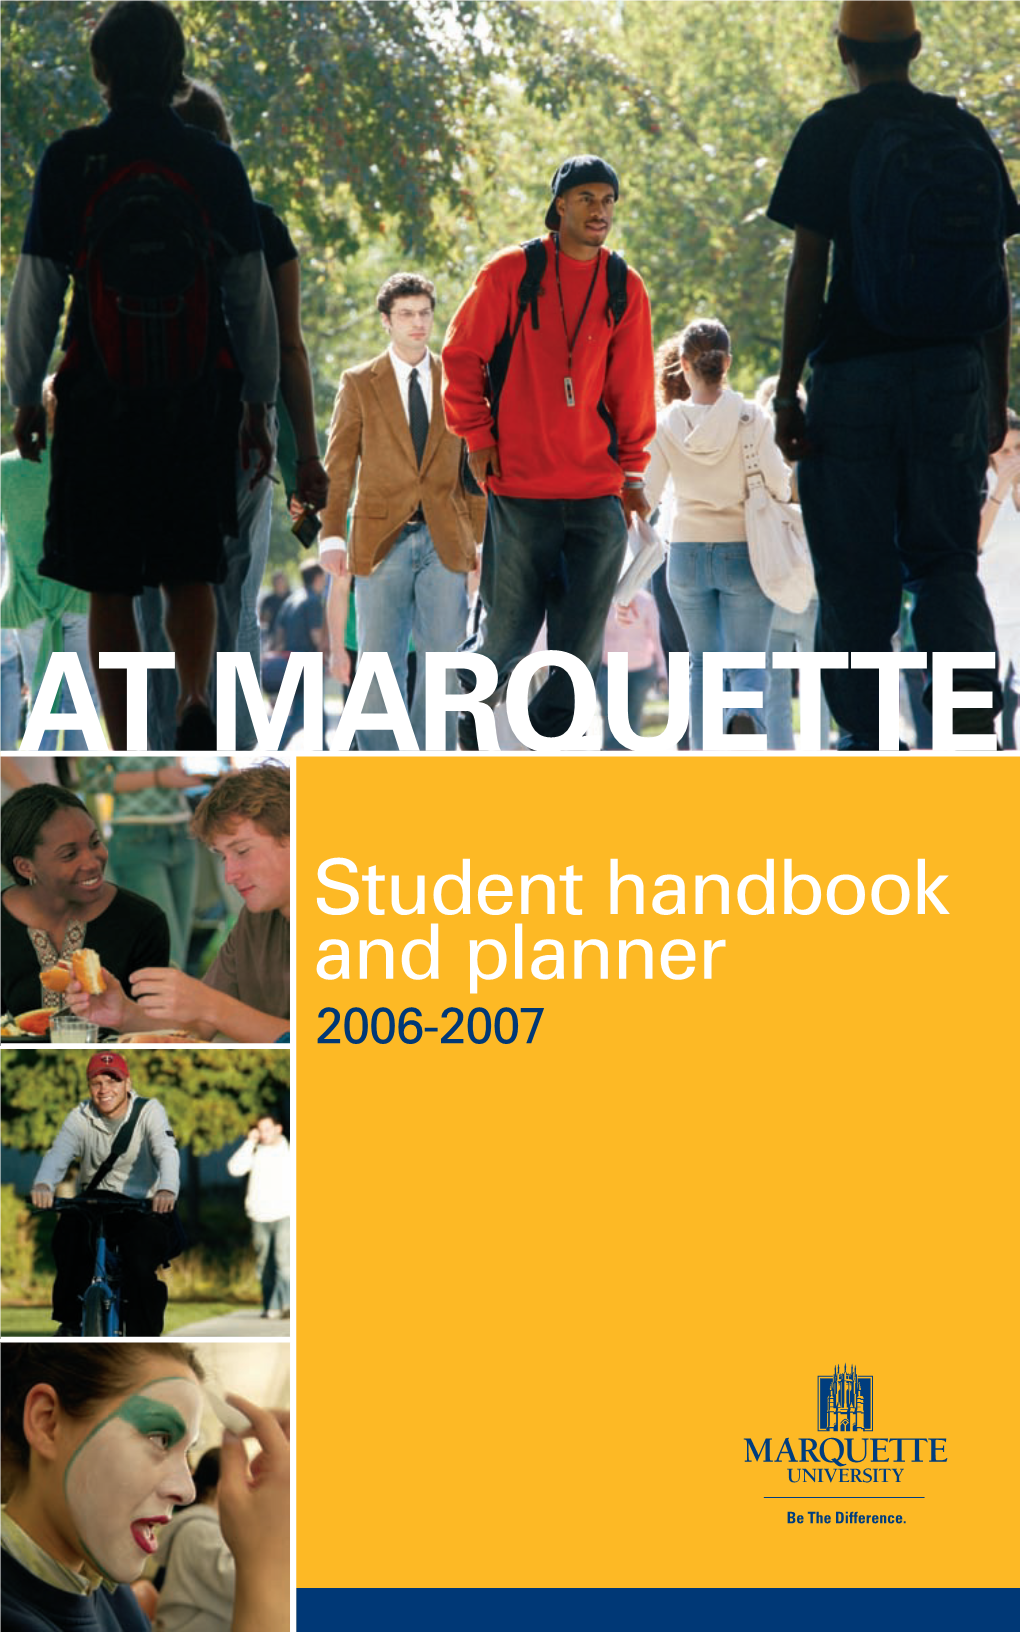 AT MARQUETTE Student Handbook and Planner 2006-2007 This Book Belongs To